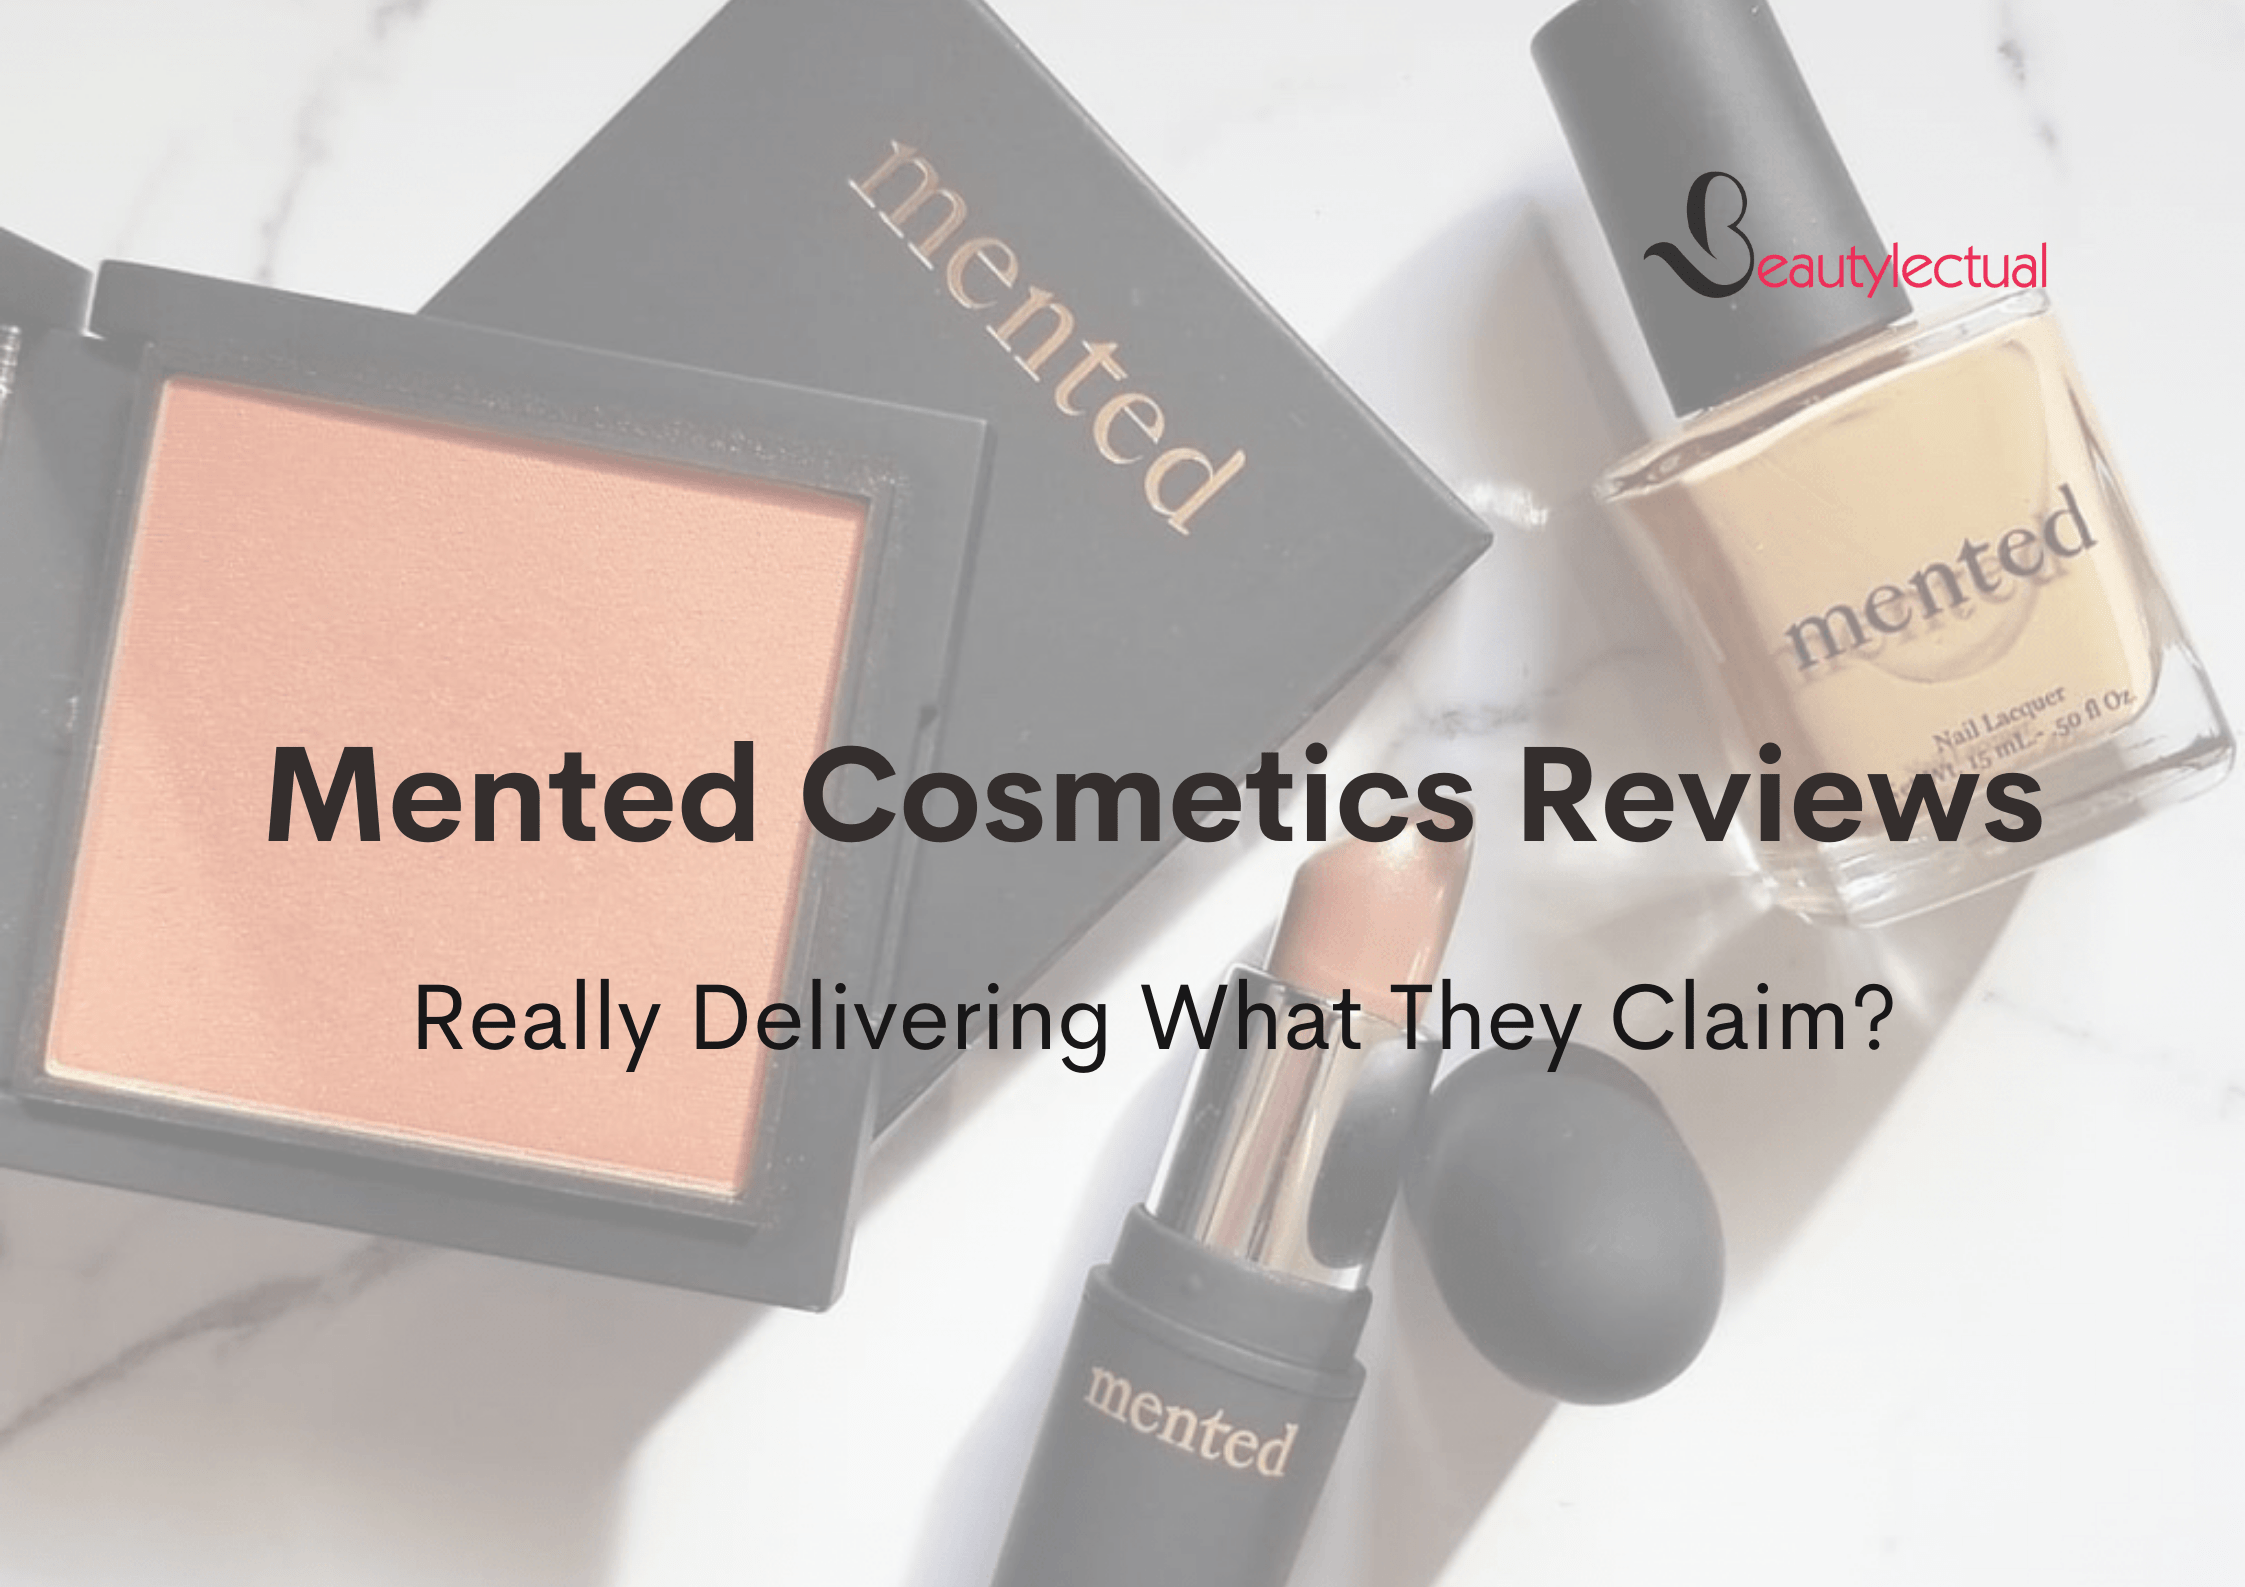 Mented Cosmetics Reviews